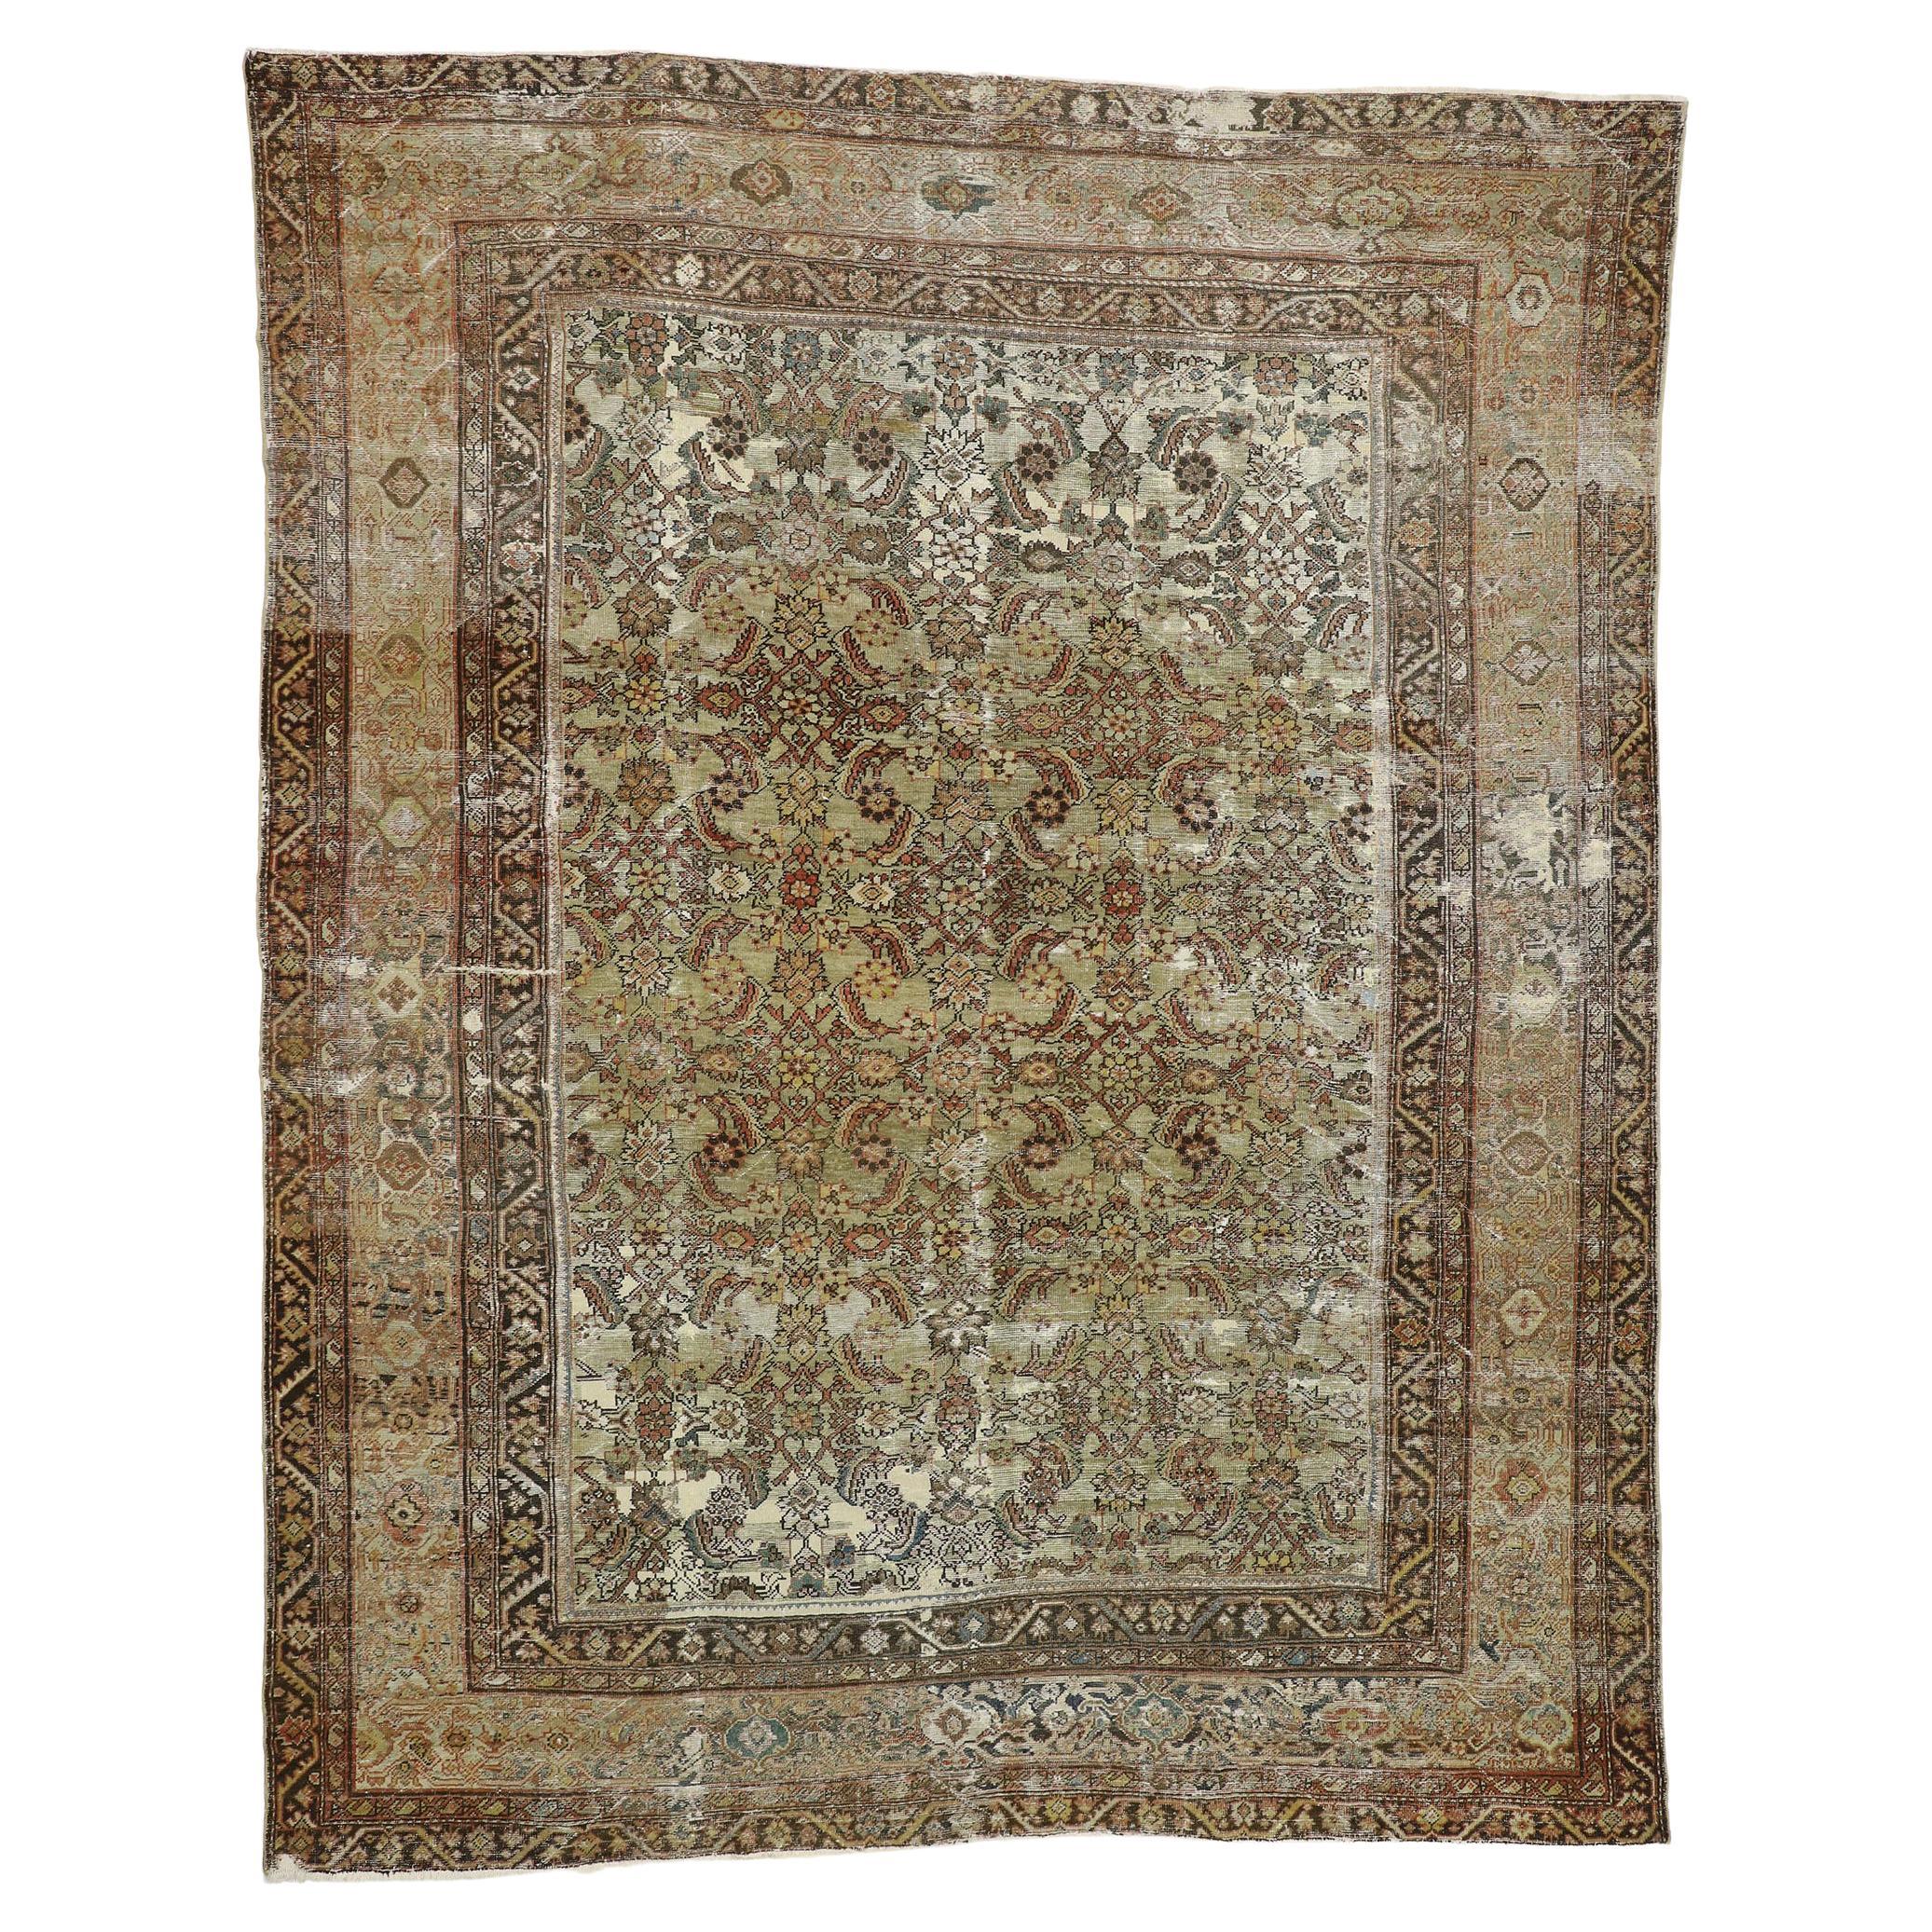 Distressed Antique Persian Sultanabad Rug with Modern Rustic Industrial Style